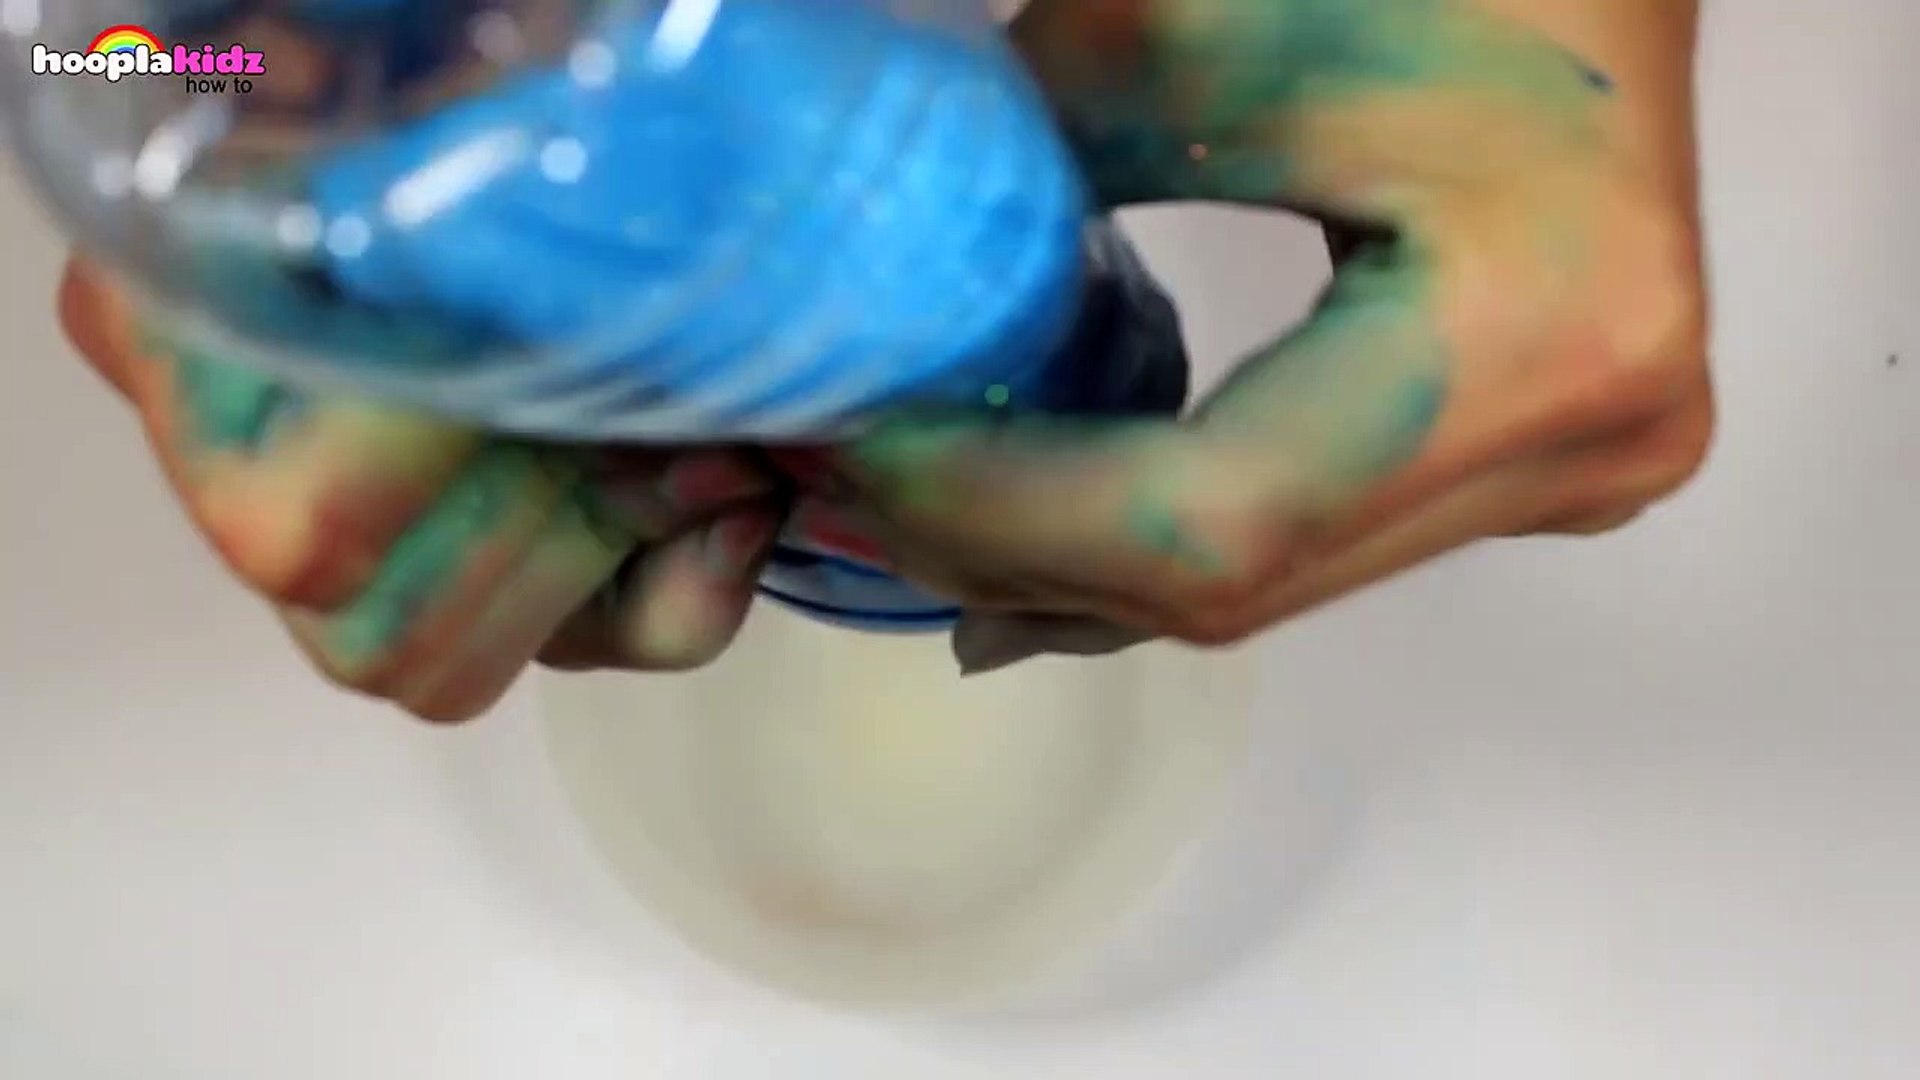 How To sh Slime Balls - Hooplakidz How To-QGCv